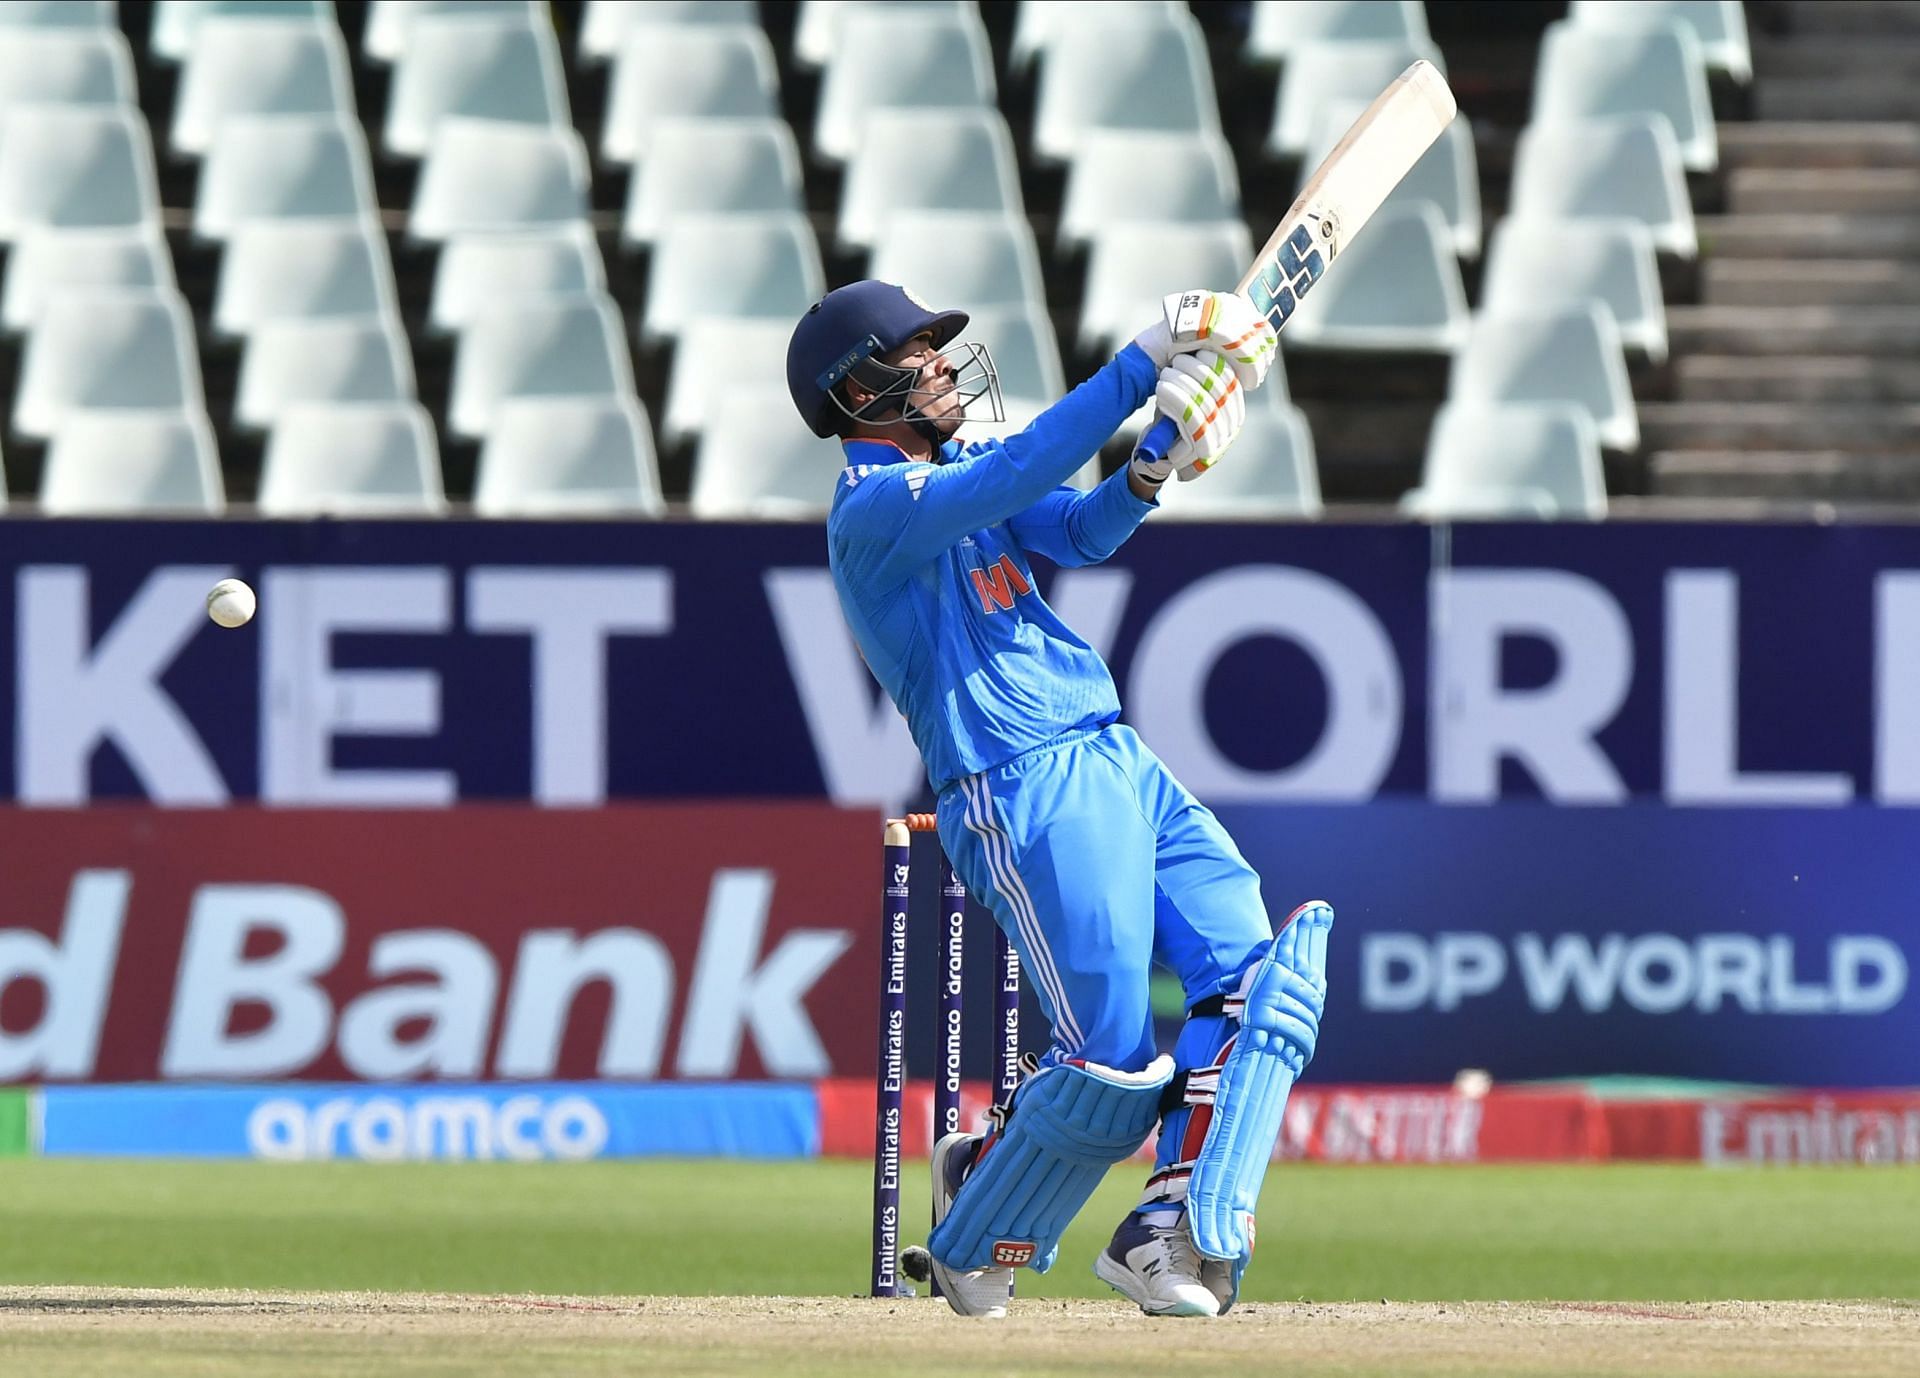 Indian captain Uday Saharan (Pic: Getty Images)